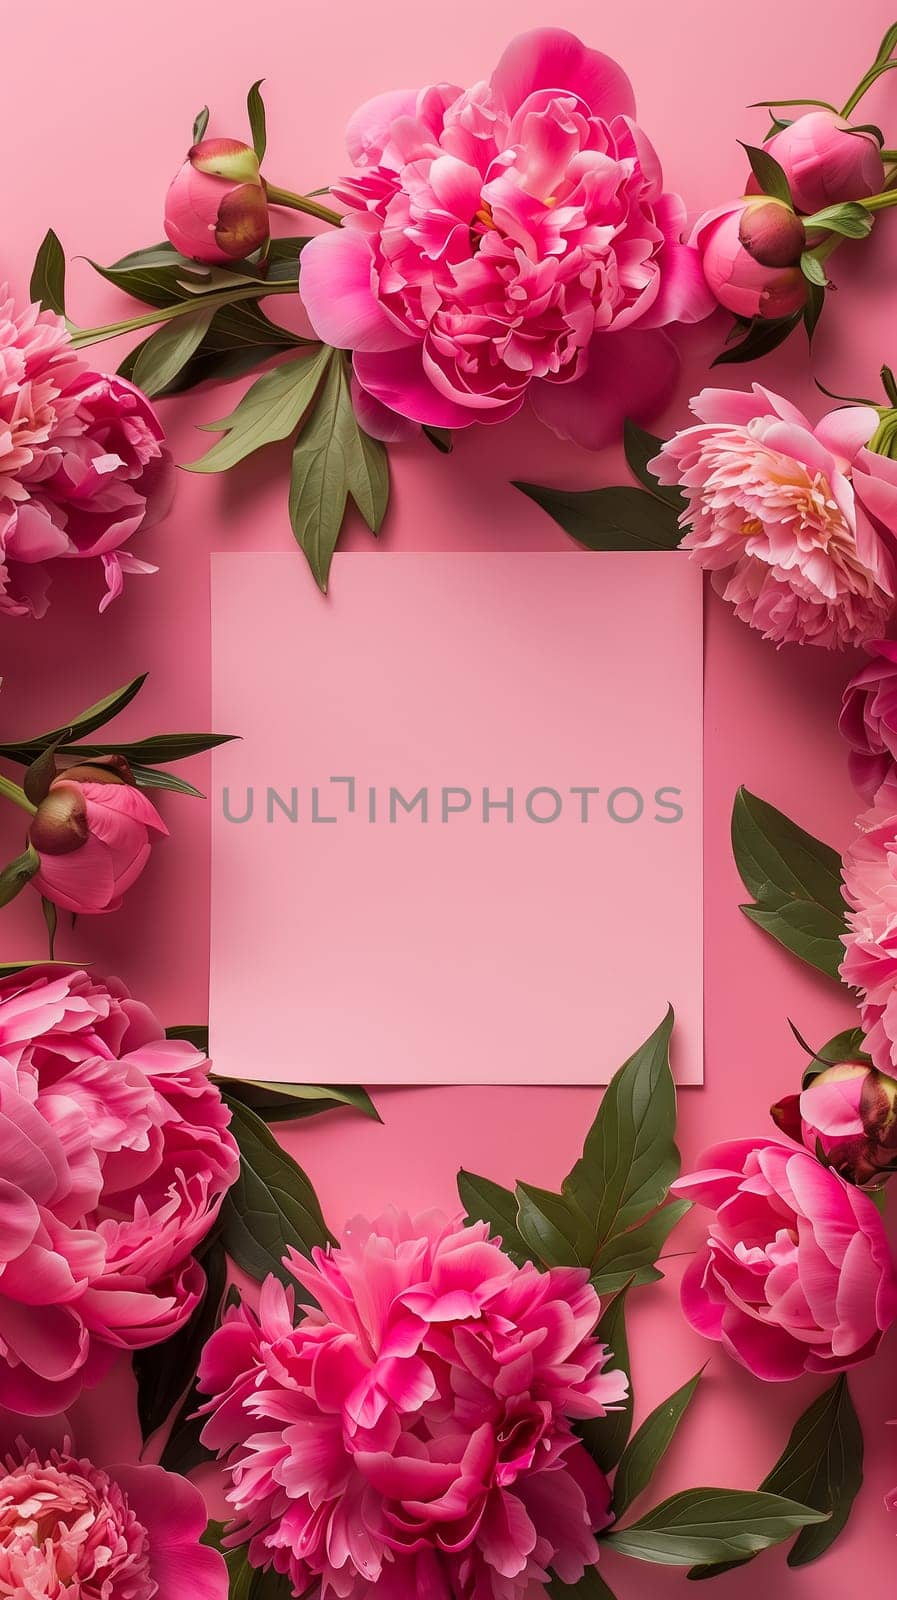 Flowers composition. Wreath made of pink peonies flowers, blank square paper sheet on pink background. Flat lay, top view, copy space. Aesthetic Valentine's Day, Mother's Day mockup template by sarymsakov